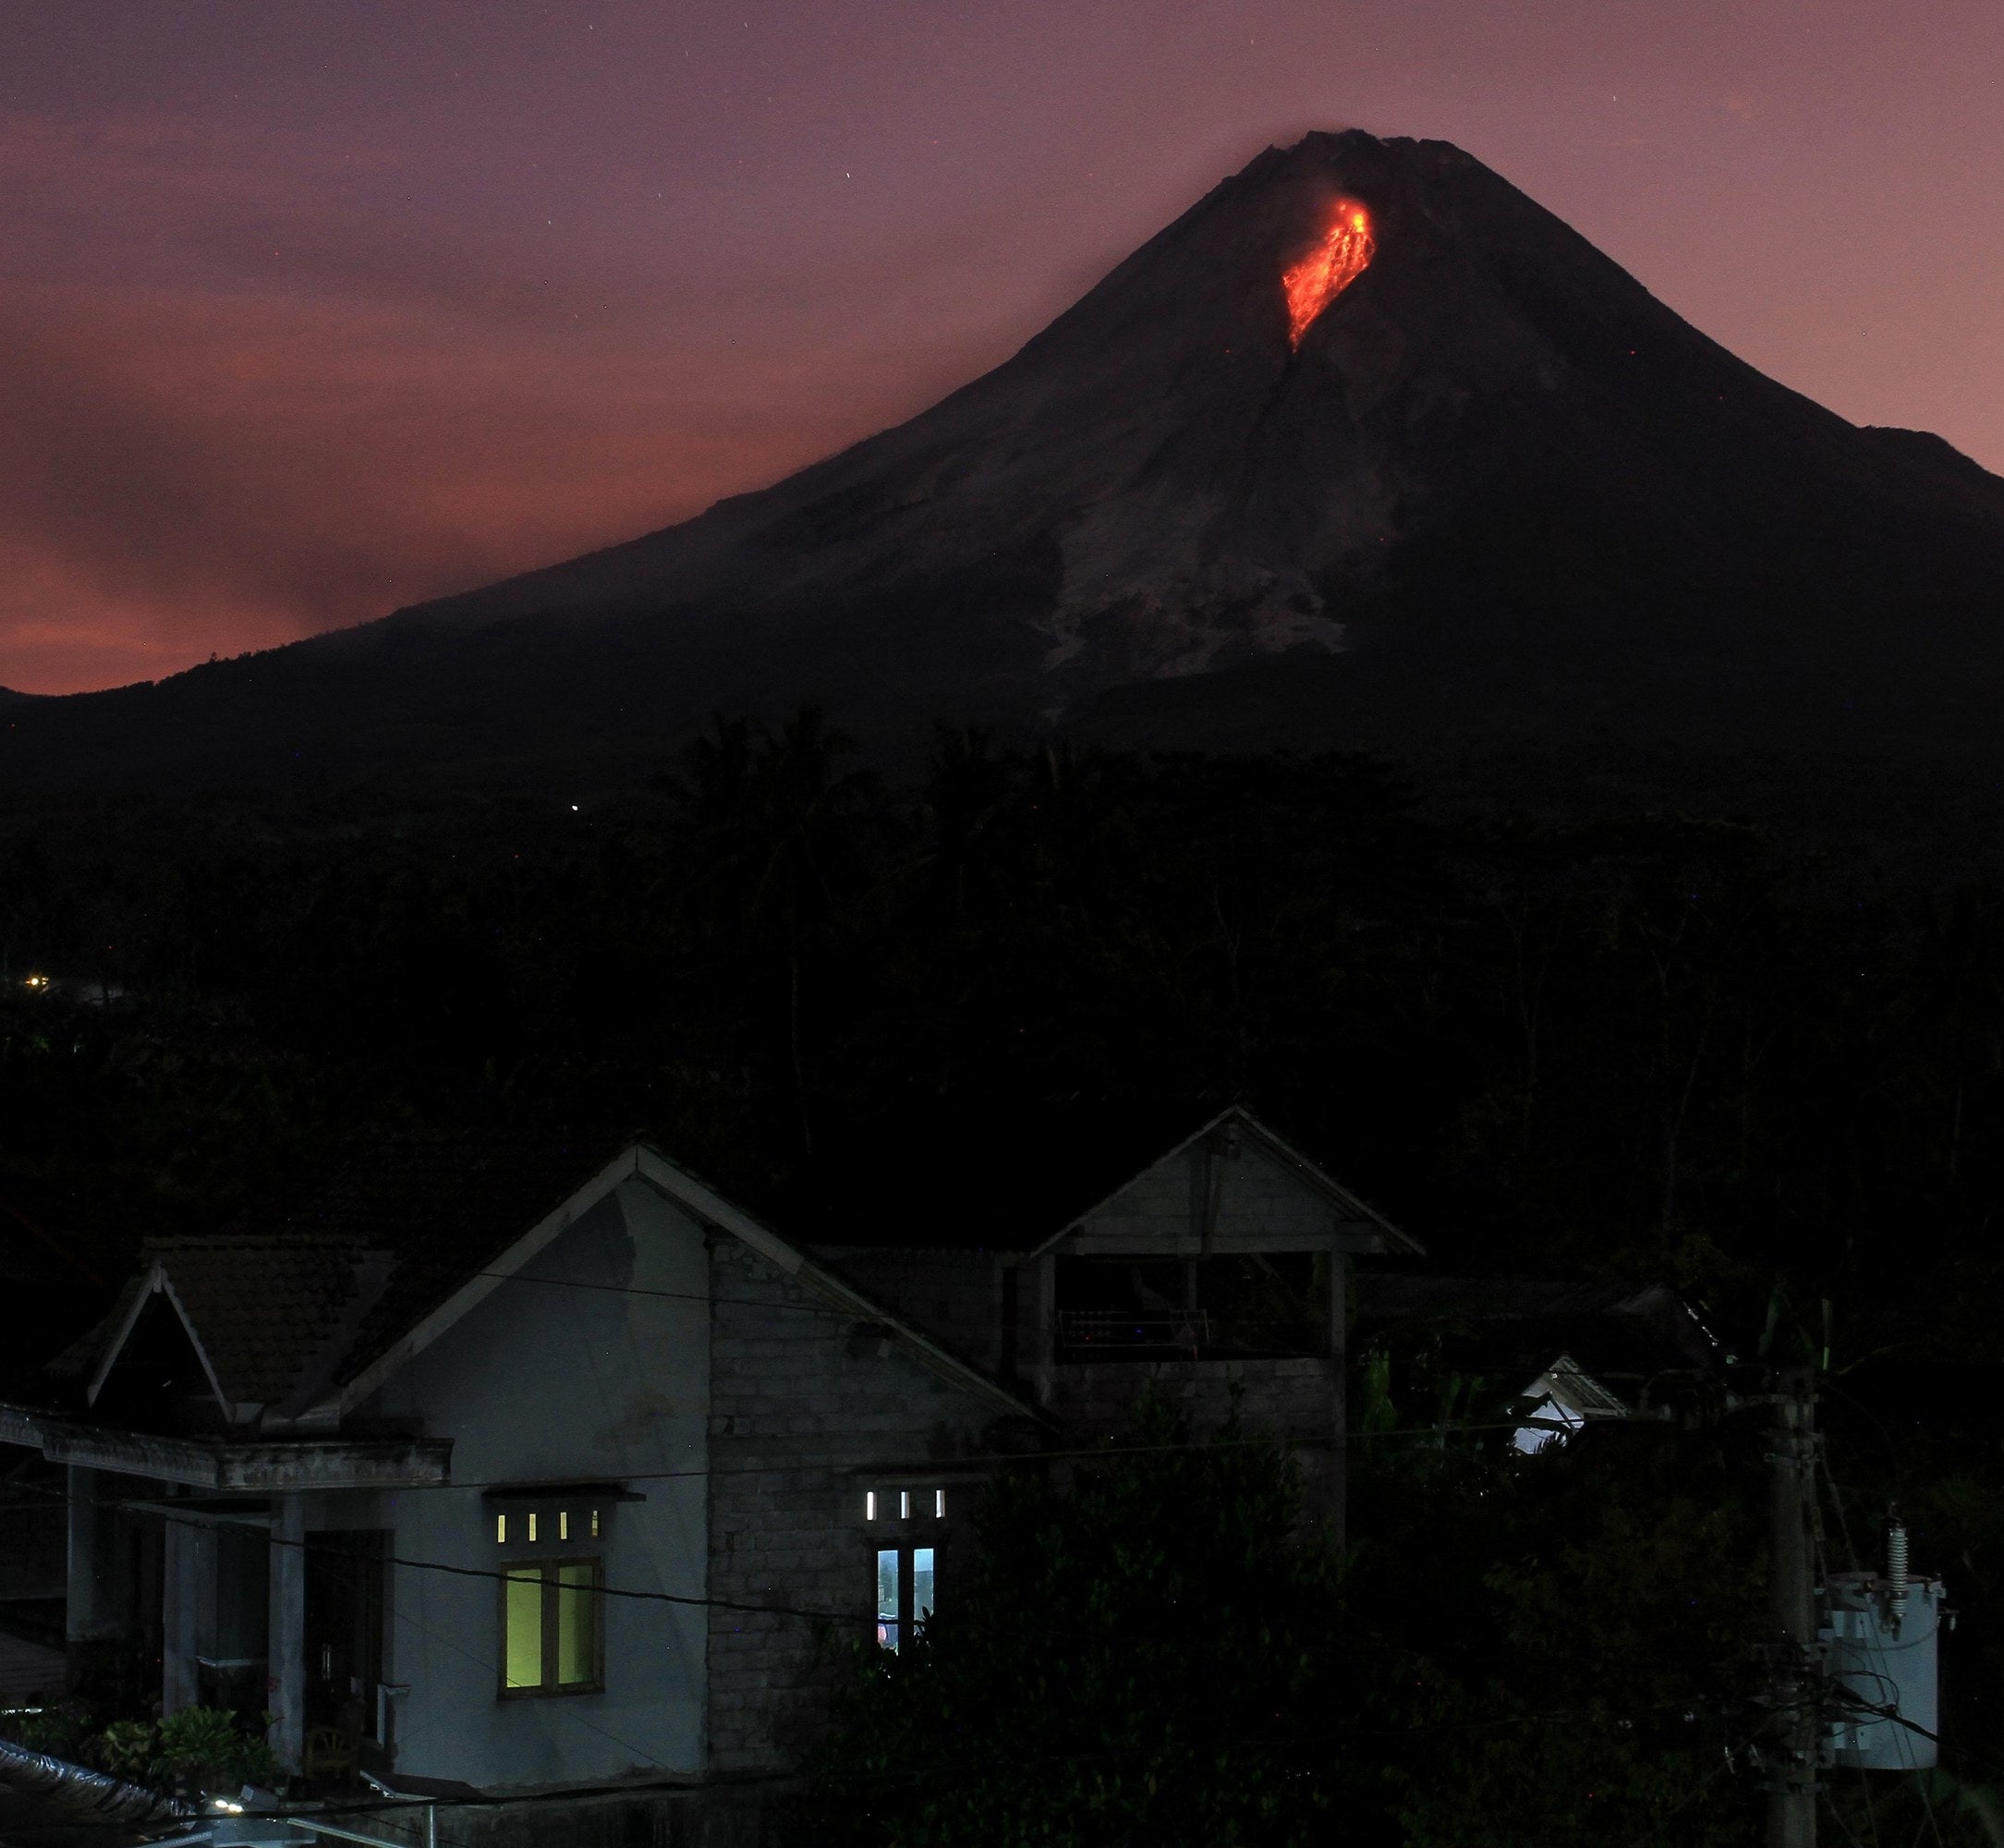 Kaliurang village sitting at the base of Mount Merapi at night as the sun sets, lava pours out of the volcano